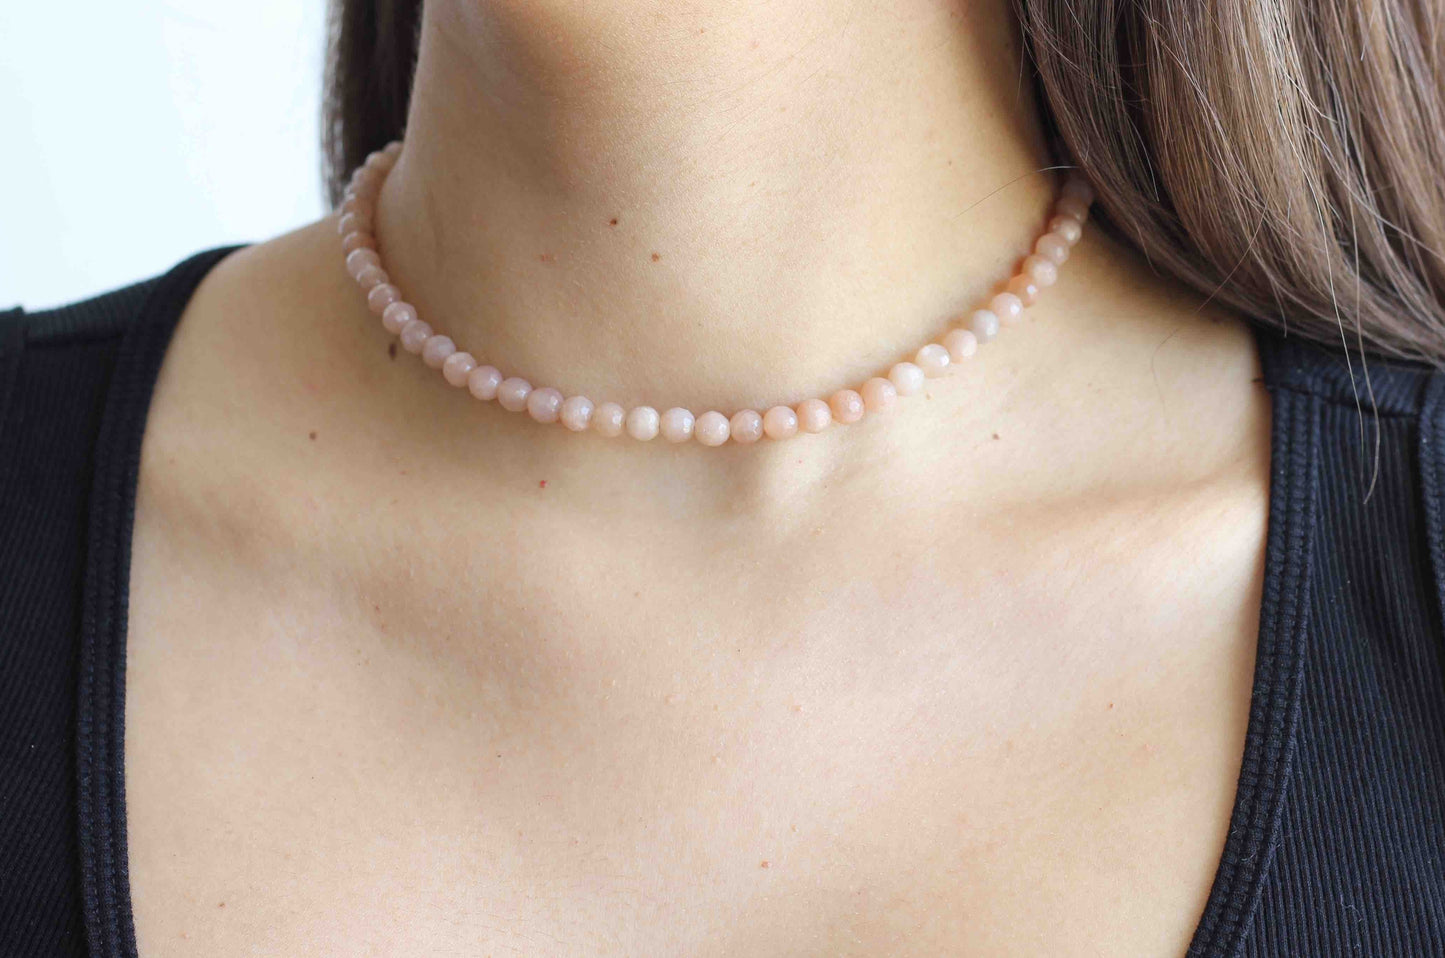 Handmade Minimalist Pink Moonstone 6mm Beaded Gemstone Choker Necklace with Sterling Silver Closure